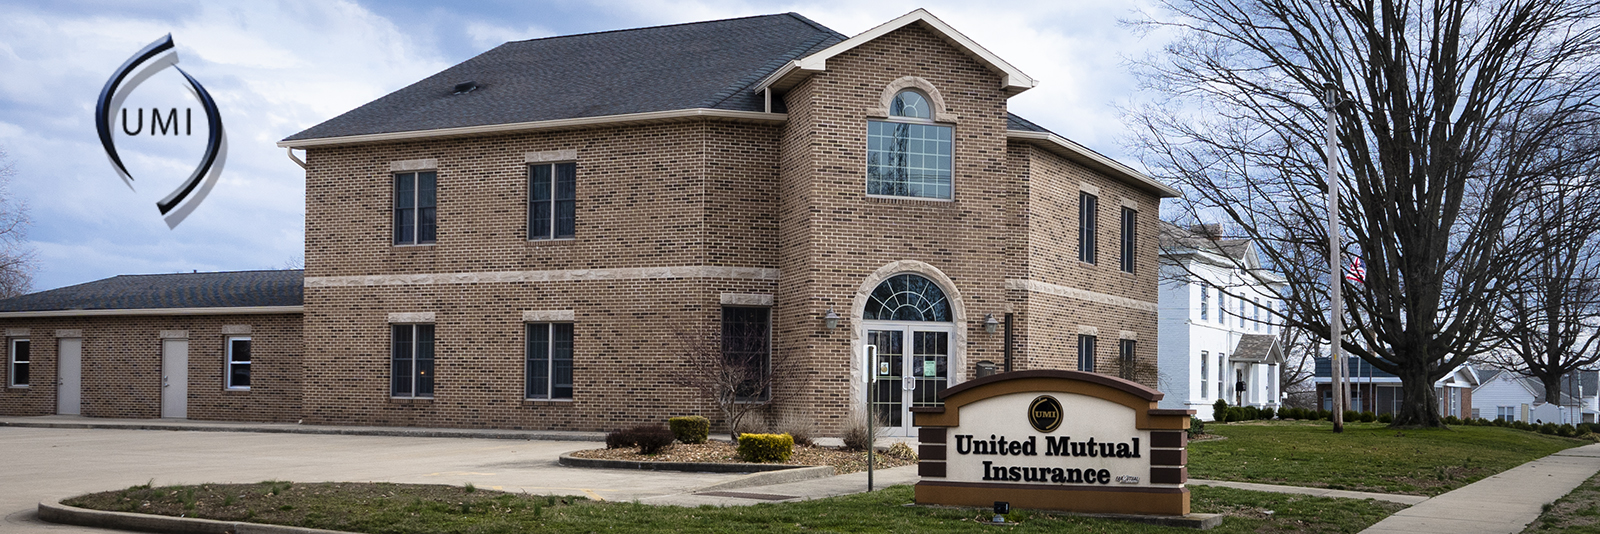 United Mutual Insurance office building